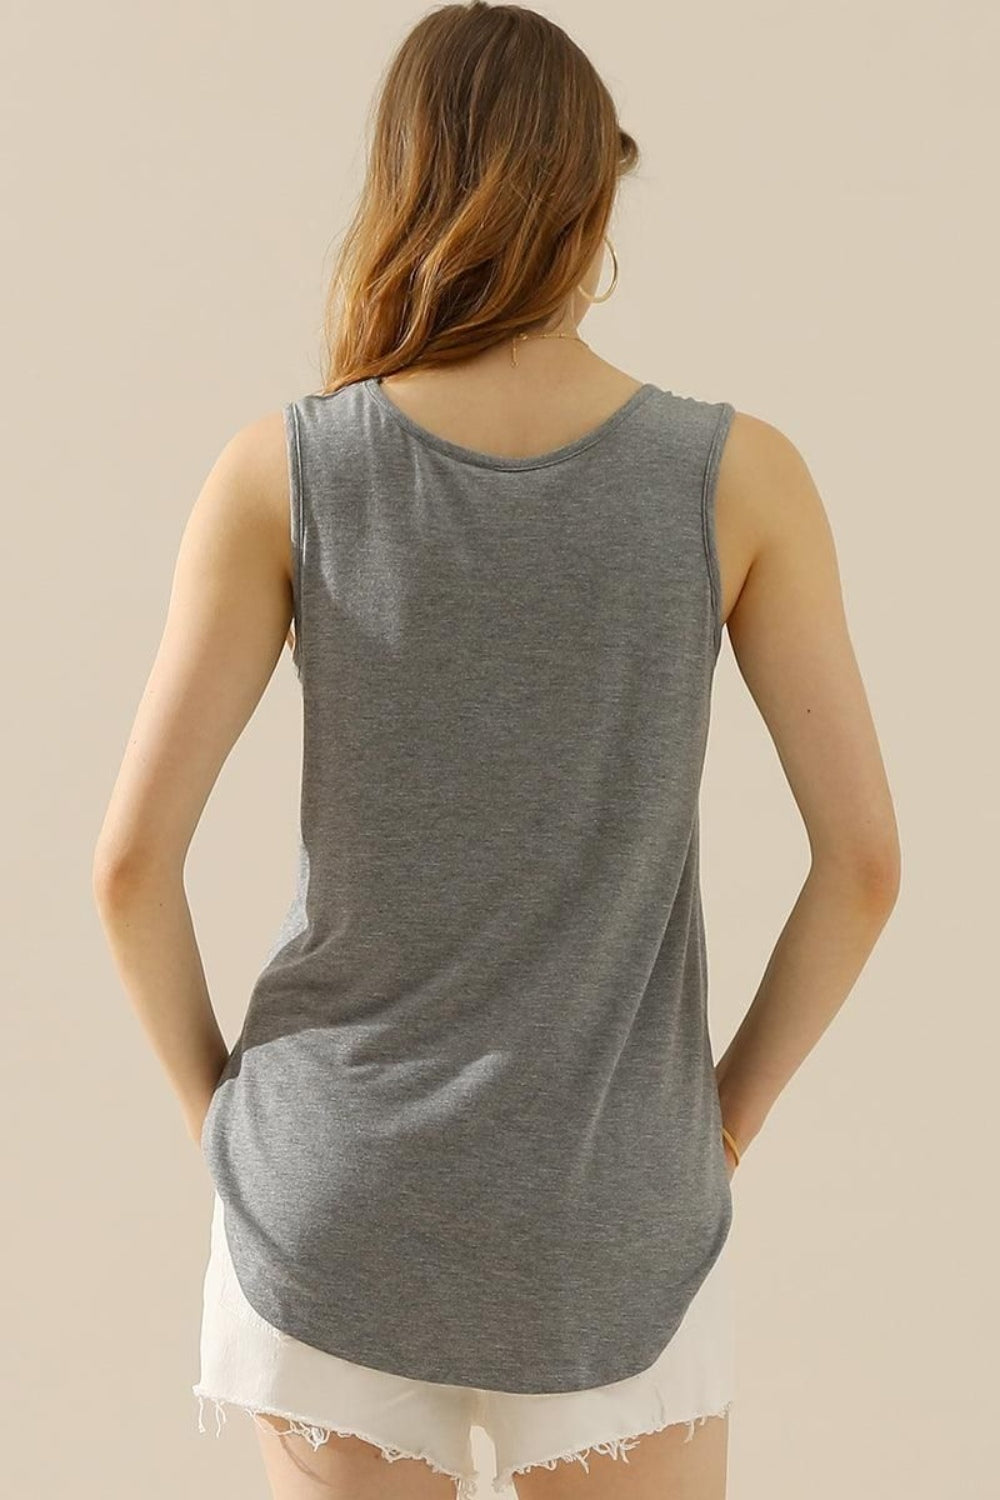 The V-Neck Curved Hem Tank is a stylish and versatile piece. With its flattering neckline and curved hem, it adds a touch of femininity to any outfit. The tank's relaxed fit provides comfort without sacrificing style. S -3X